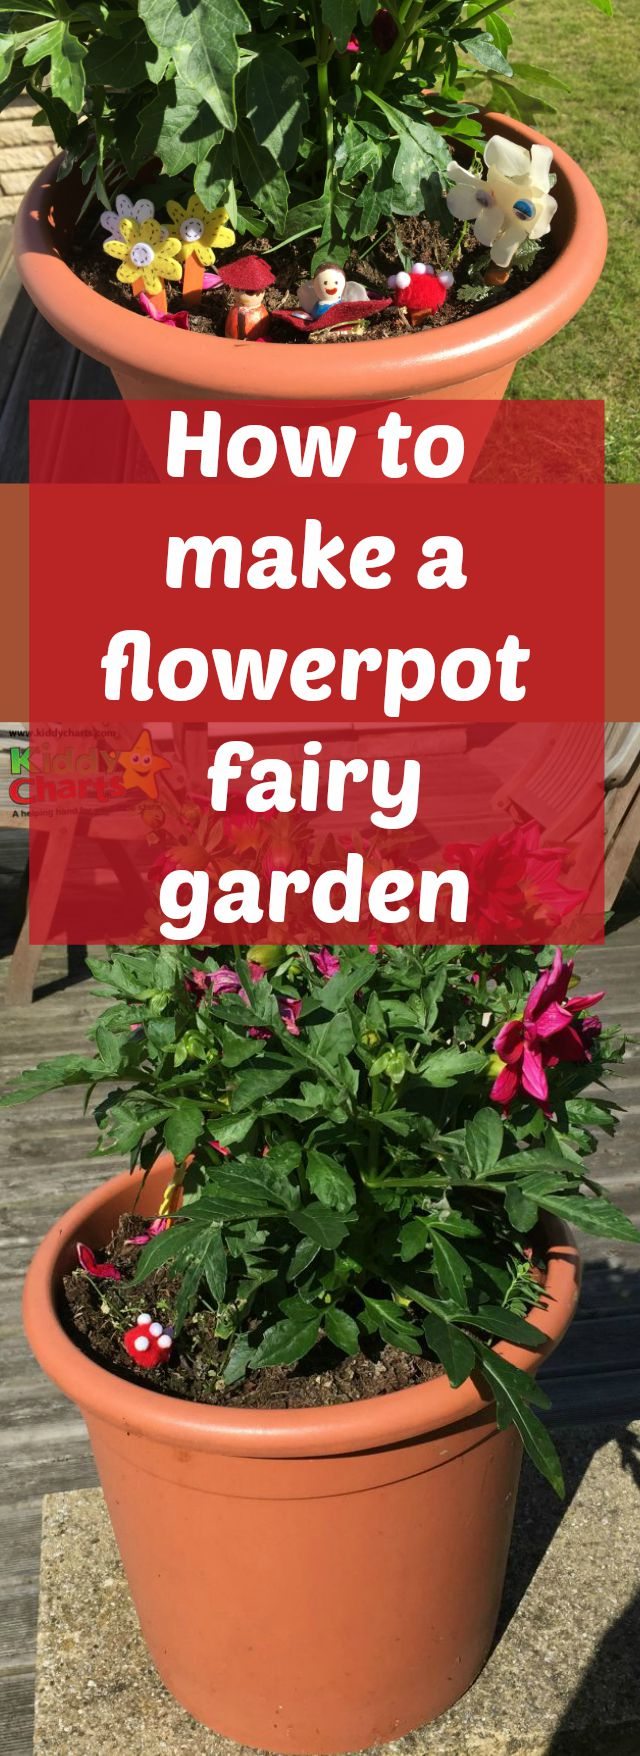 Crafts in the grden are a lovely thing to do with the kids - and this flowerpot fairy garden is no exception. Simple to make, and such fun to play with, the kids are bound to love it - ours definitely did!